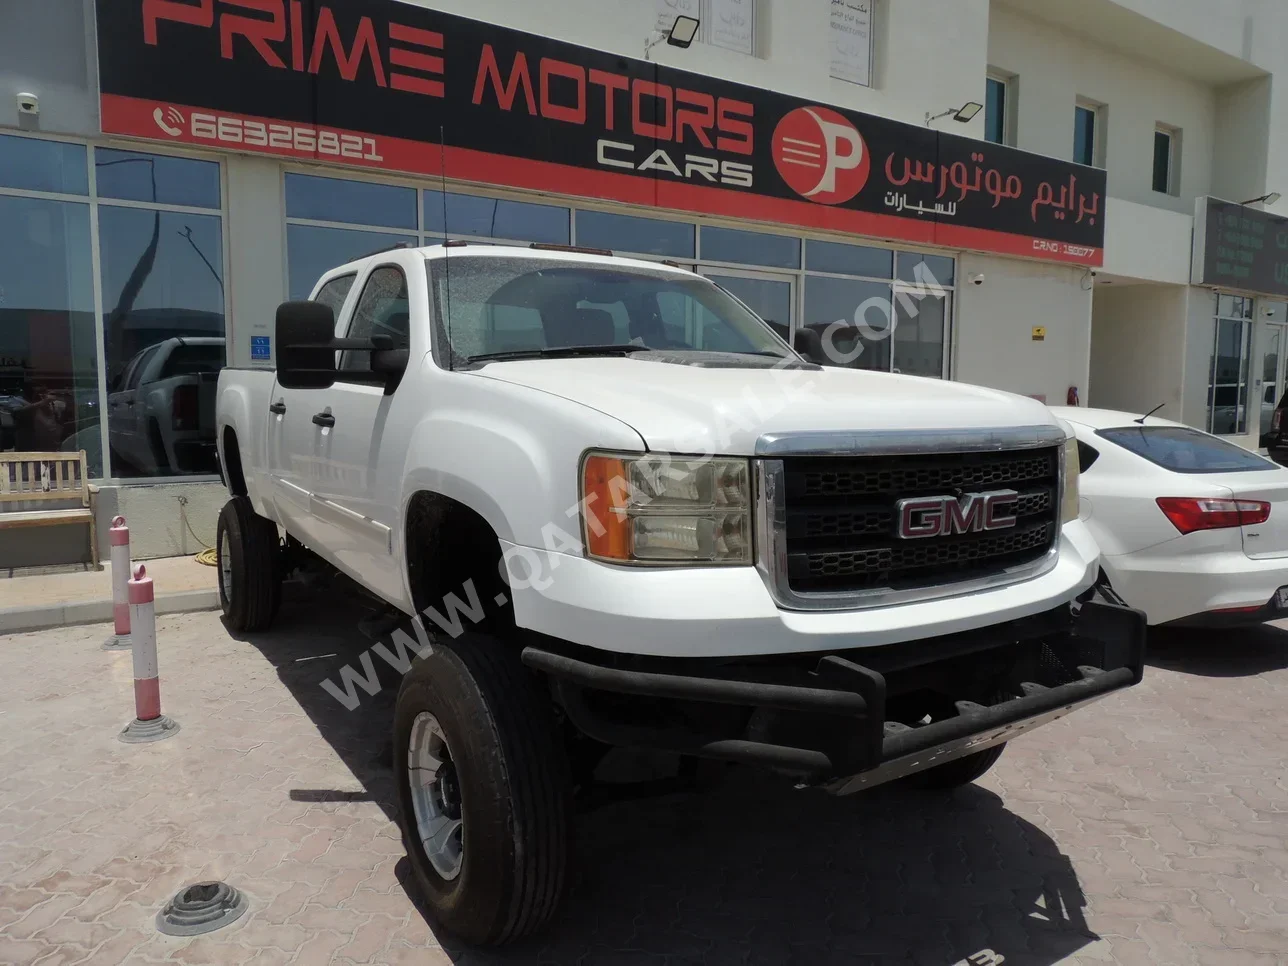 GMC  Sierra  2500 HD  2008  Automatic  145,000 Km  8 Cylinder  Four Wheel Drive (4WD)  Pick Up  White